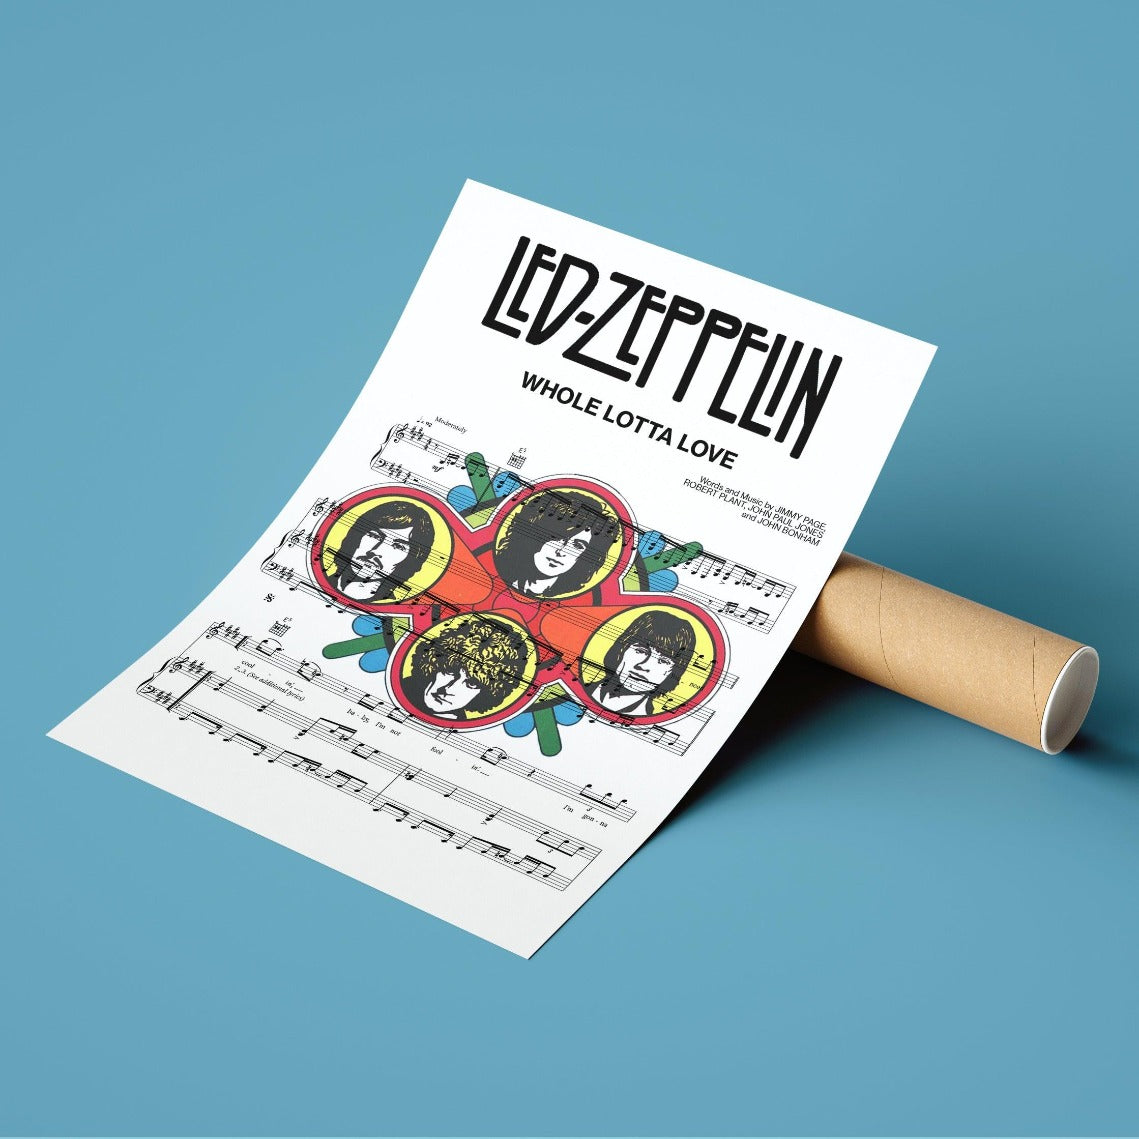 Capture the spirit of the classic rock group with this limited edition Led Zeppelin - Whole Lotta Love Poster from 98Types Music. This modern artwork celebrates one of the greatest bands of all time in a playful and contemporary way. Featuring the heart-stopping tune and unforgettable lyrics, you'll be able to listen to the song and appreciate its beauty every single time you look at it! Make this iconic piece part of your home decor and show off your love for great music.